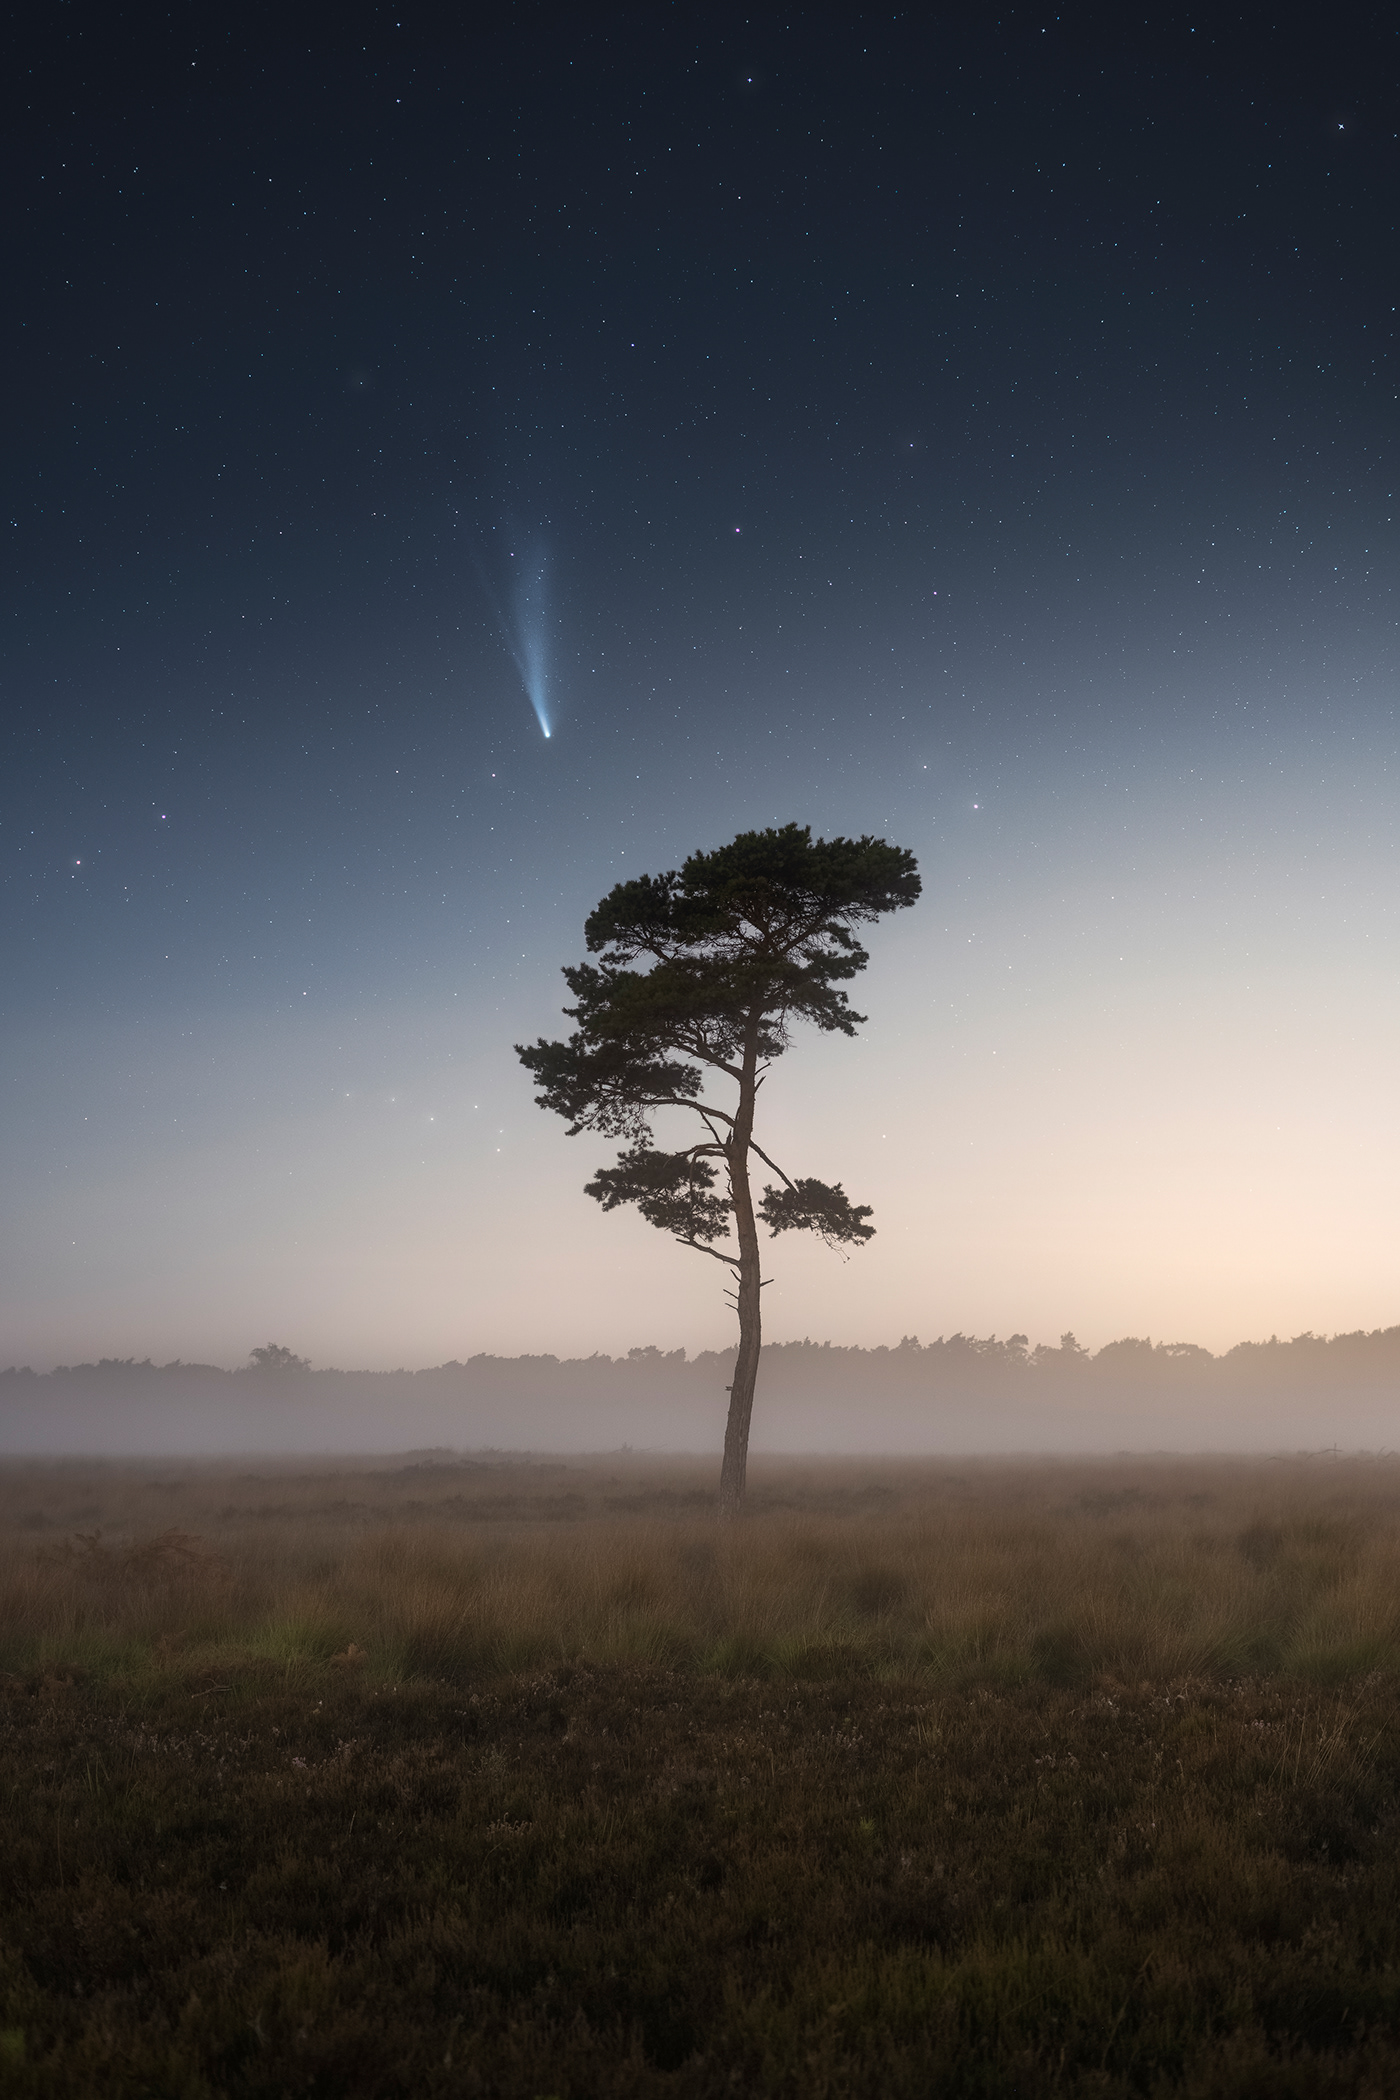 Comet neowise above an isolate pine tree during a foggy night in Belgium